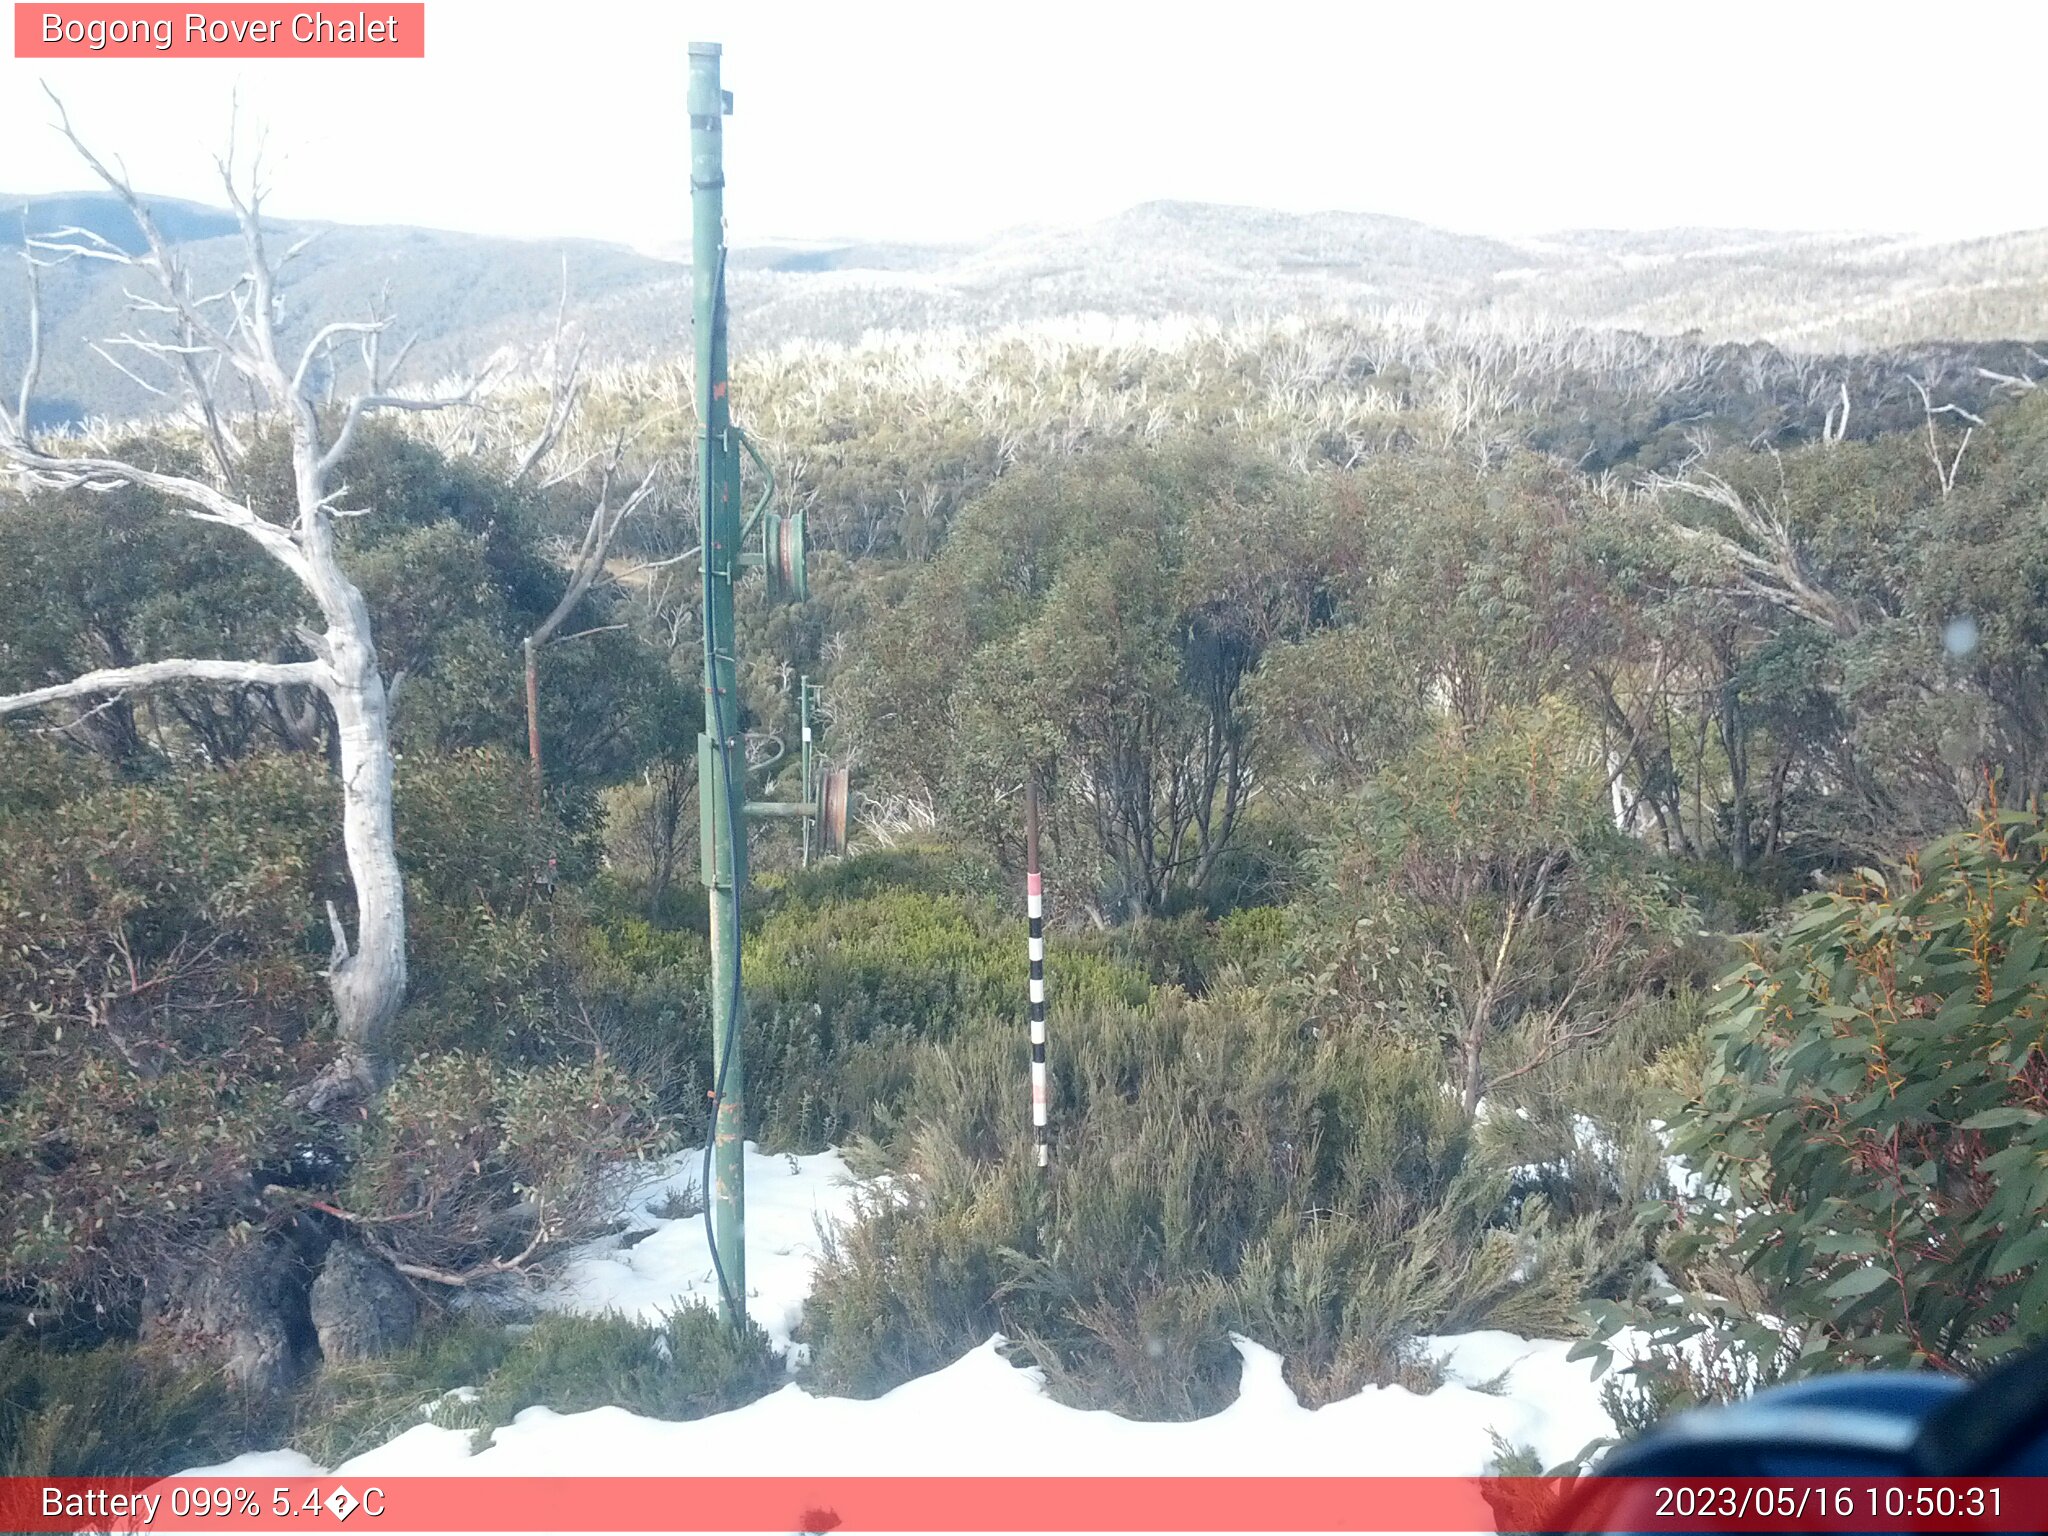 Bogong Web Cam 10:50am Tuesday 16th of May 2023